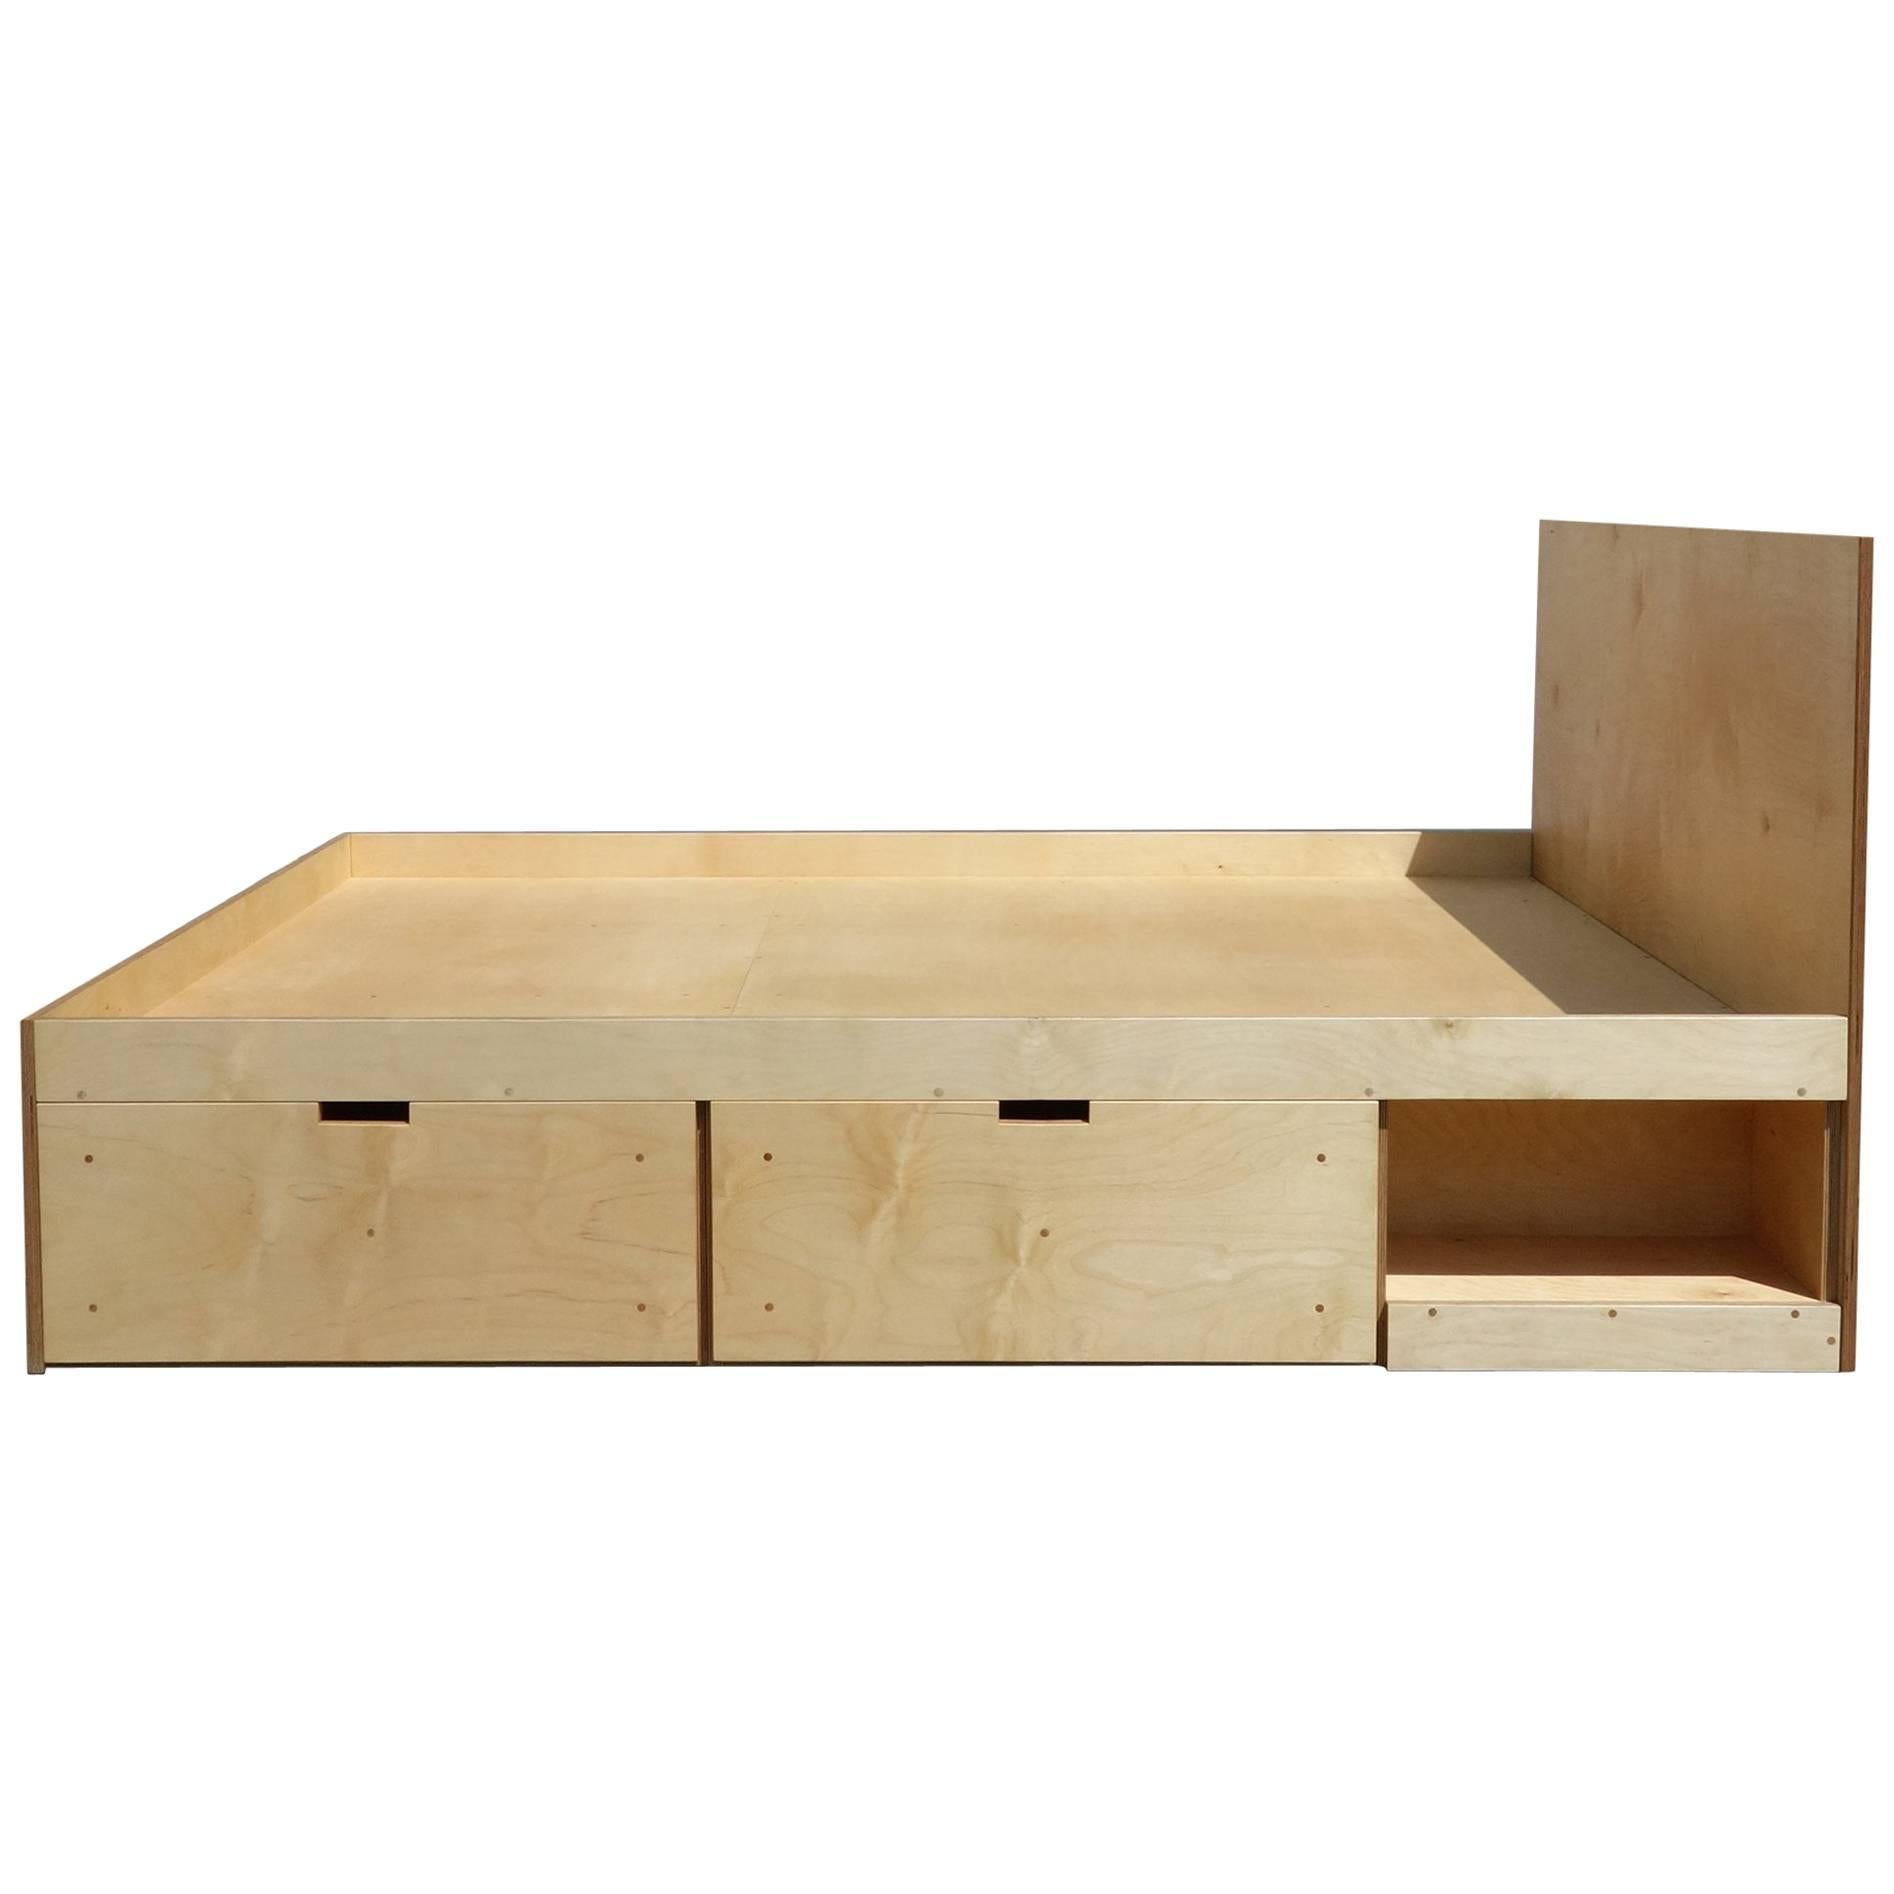 Waka Waka Contemporary Plywood Box Bed with Storage For Sale